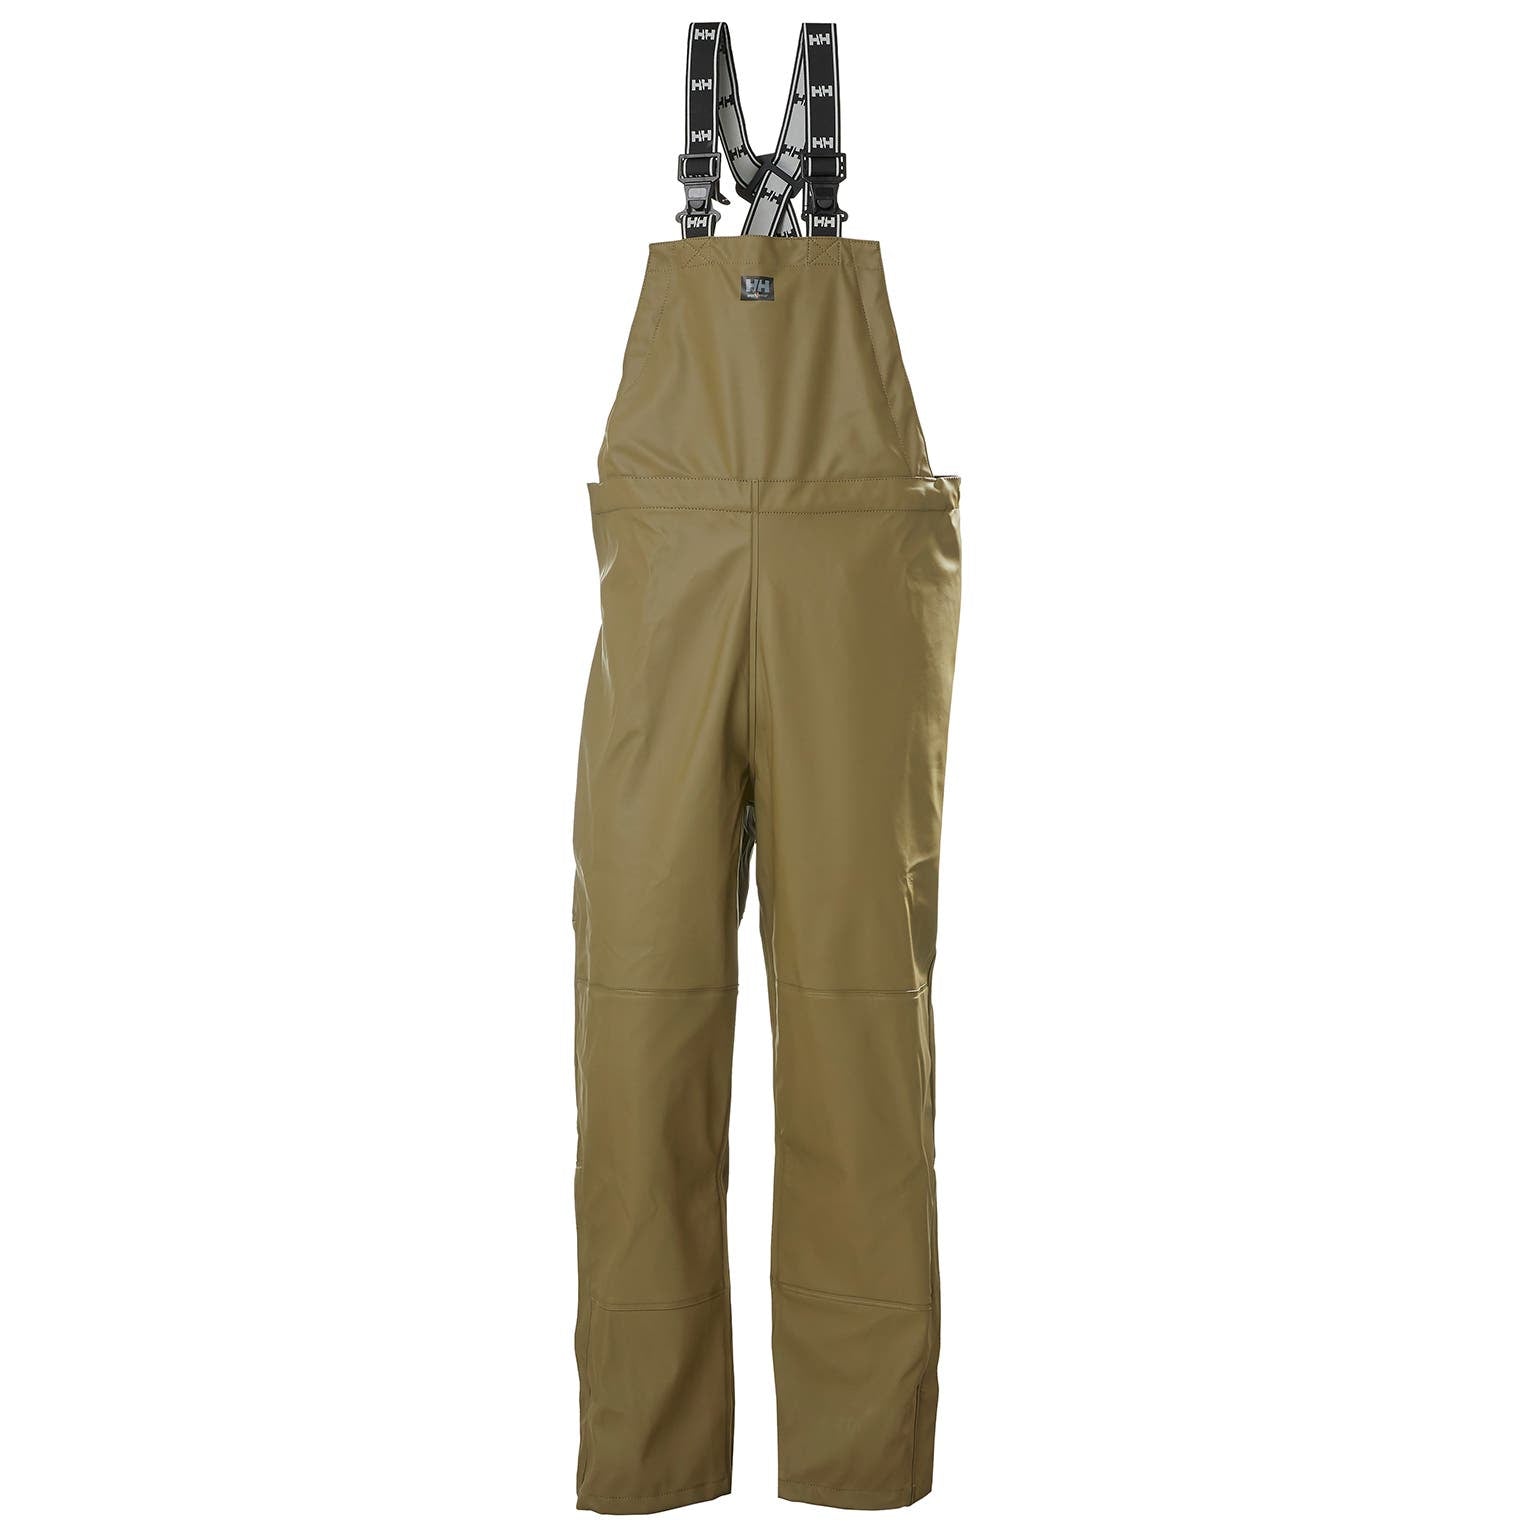 Helly Hansen Men's Impertech Rain Bib Pant in Green Brown from the front